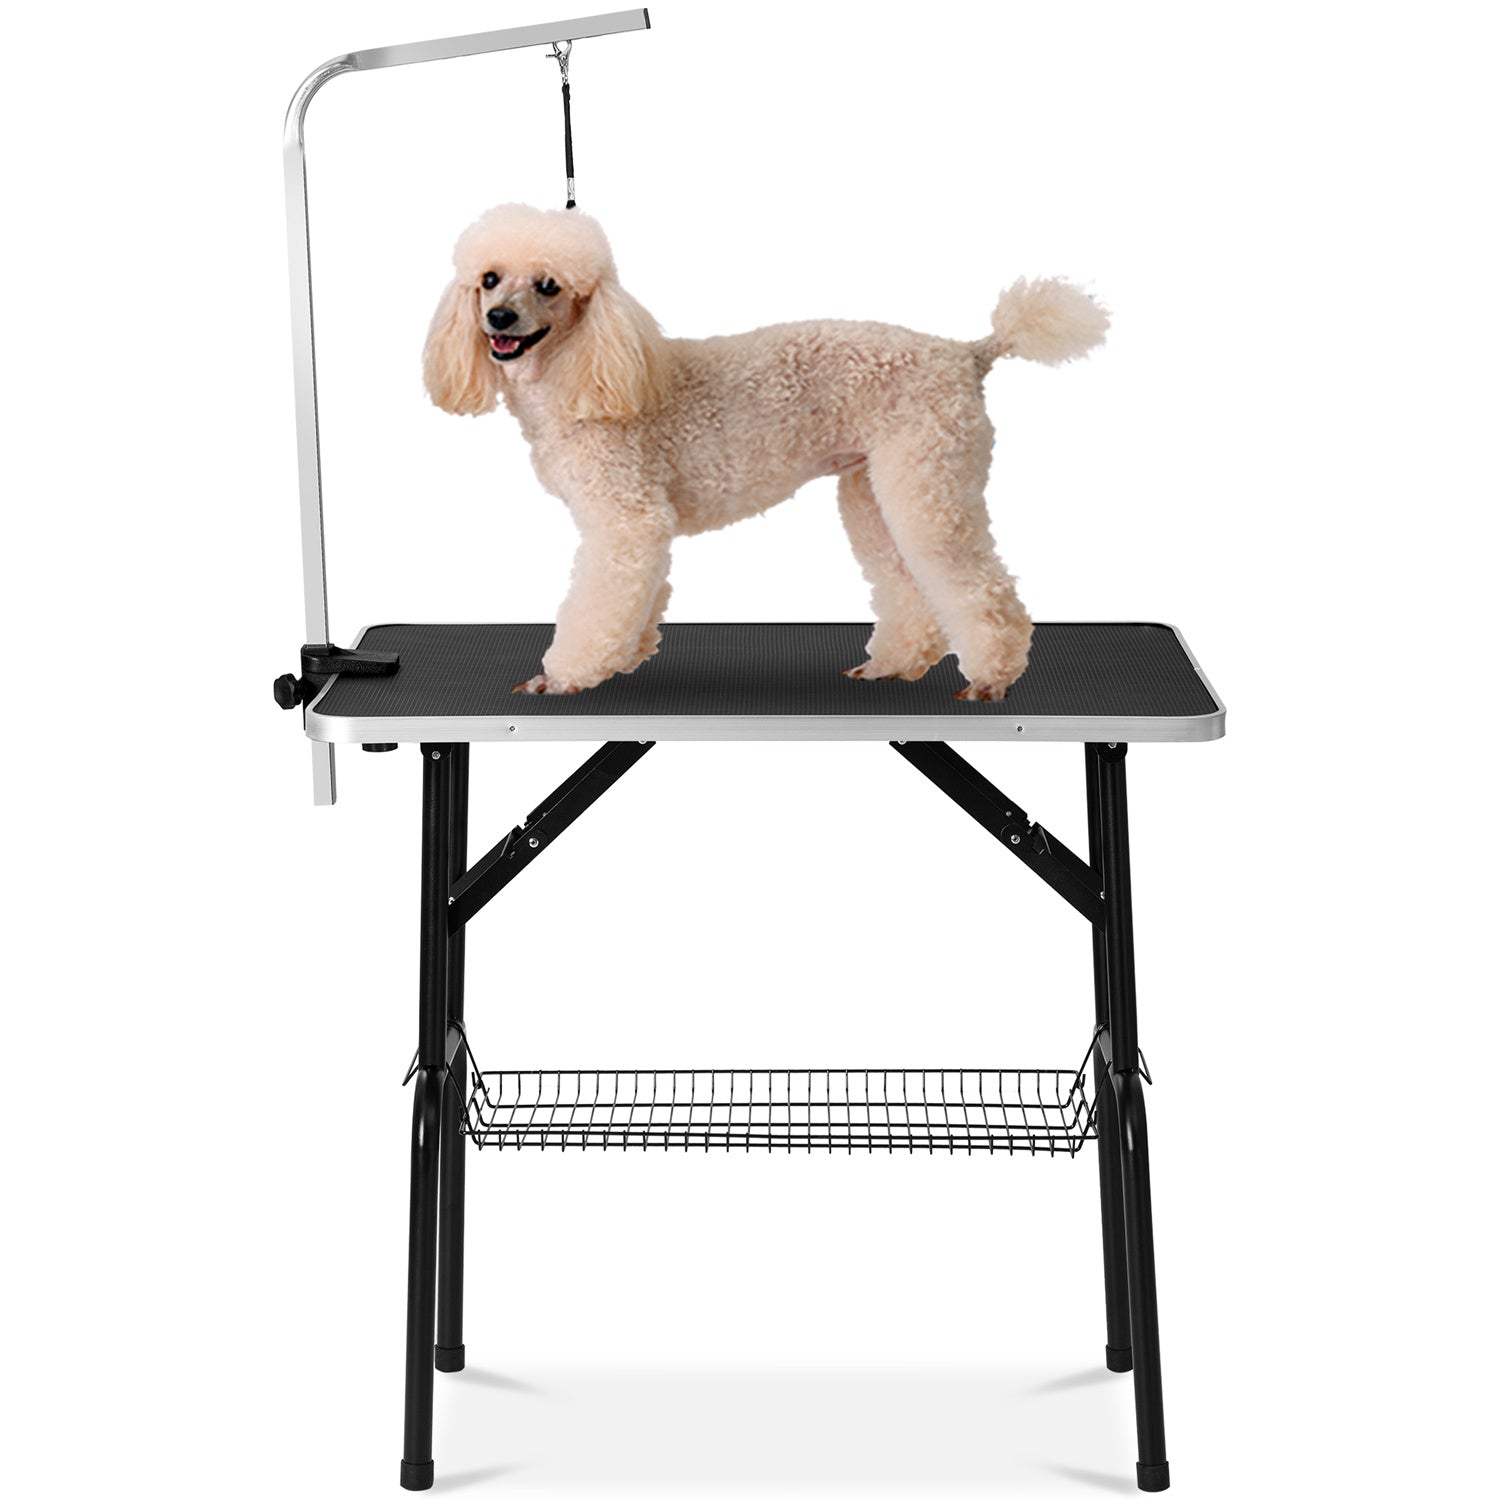 Free shipping Dog/cat grooming table adjustable height -32 "dry table with double loop/mesh tray, up to 220 LBS black